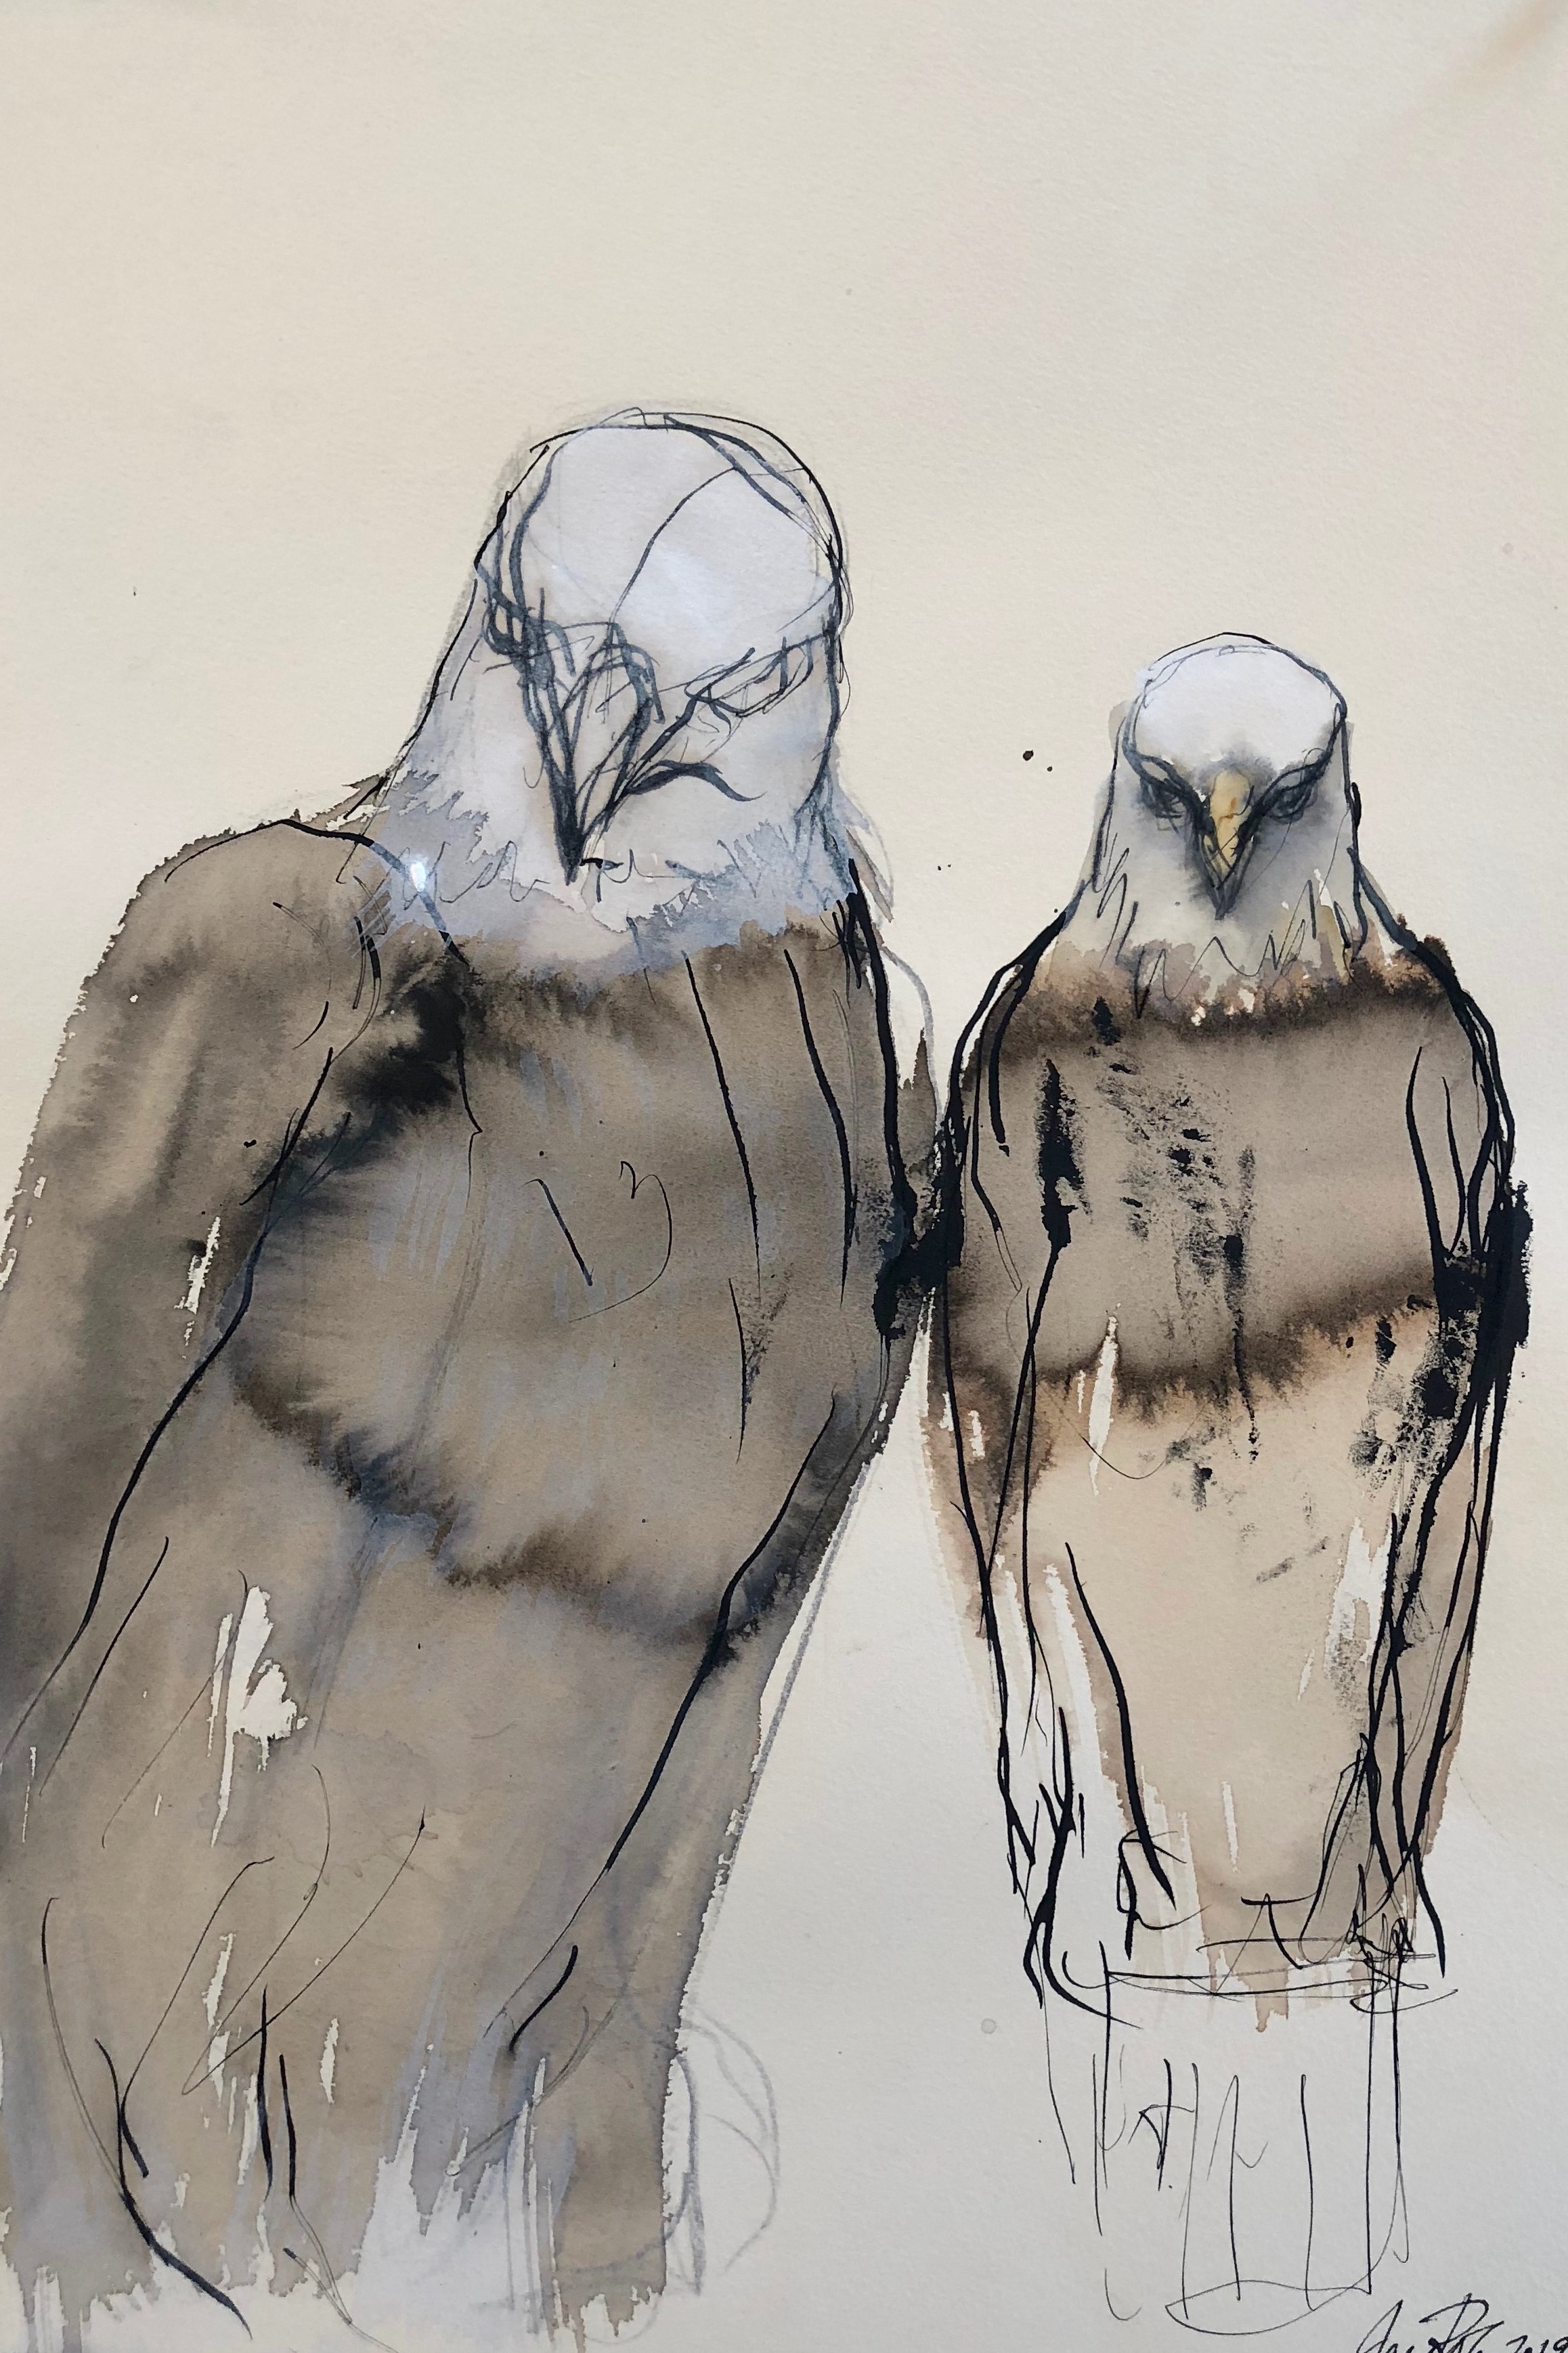  “Sumi Eagle Study,” 2019 Sumi ink and gouache on paper 22 x 15 inches 